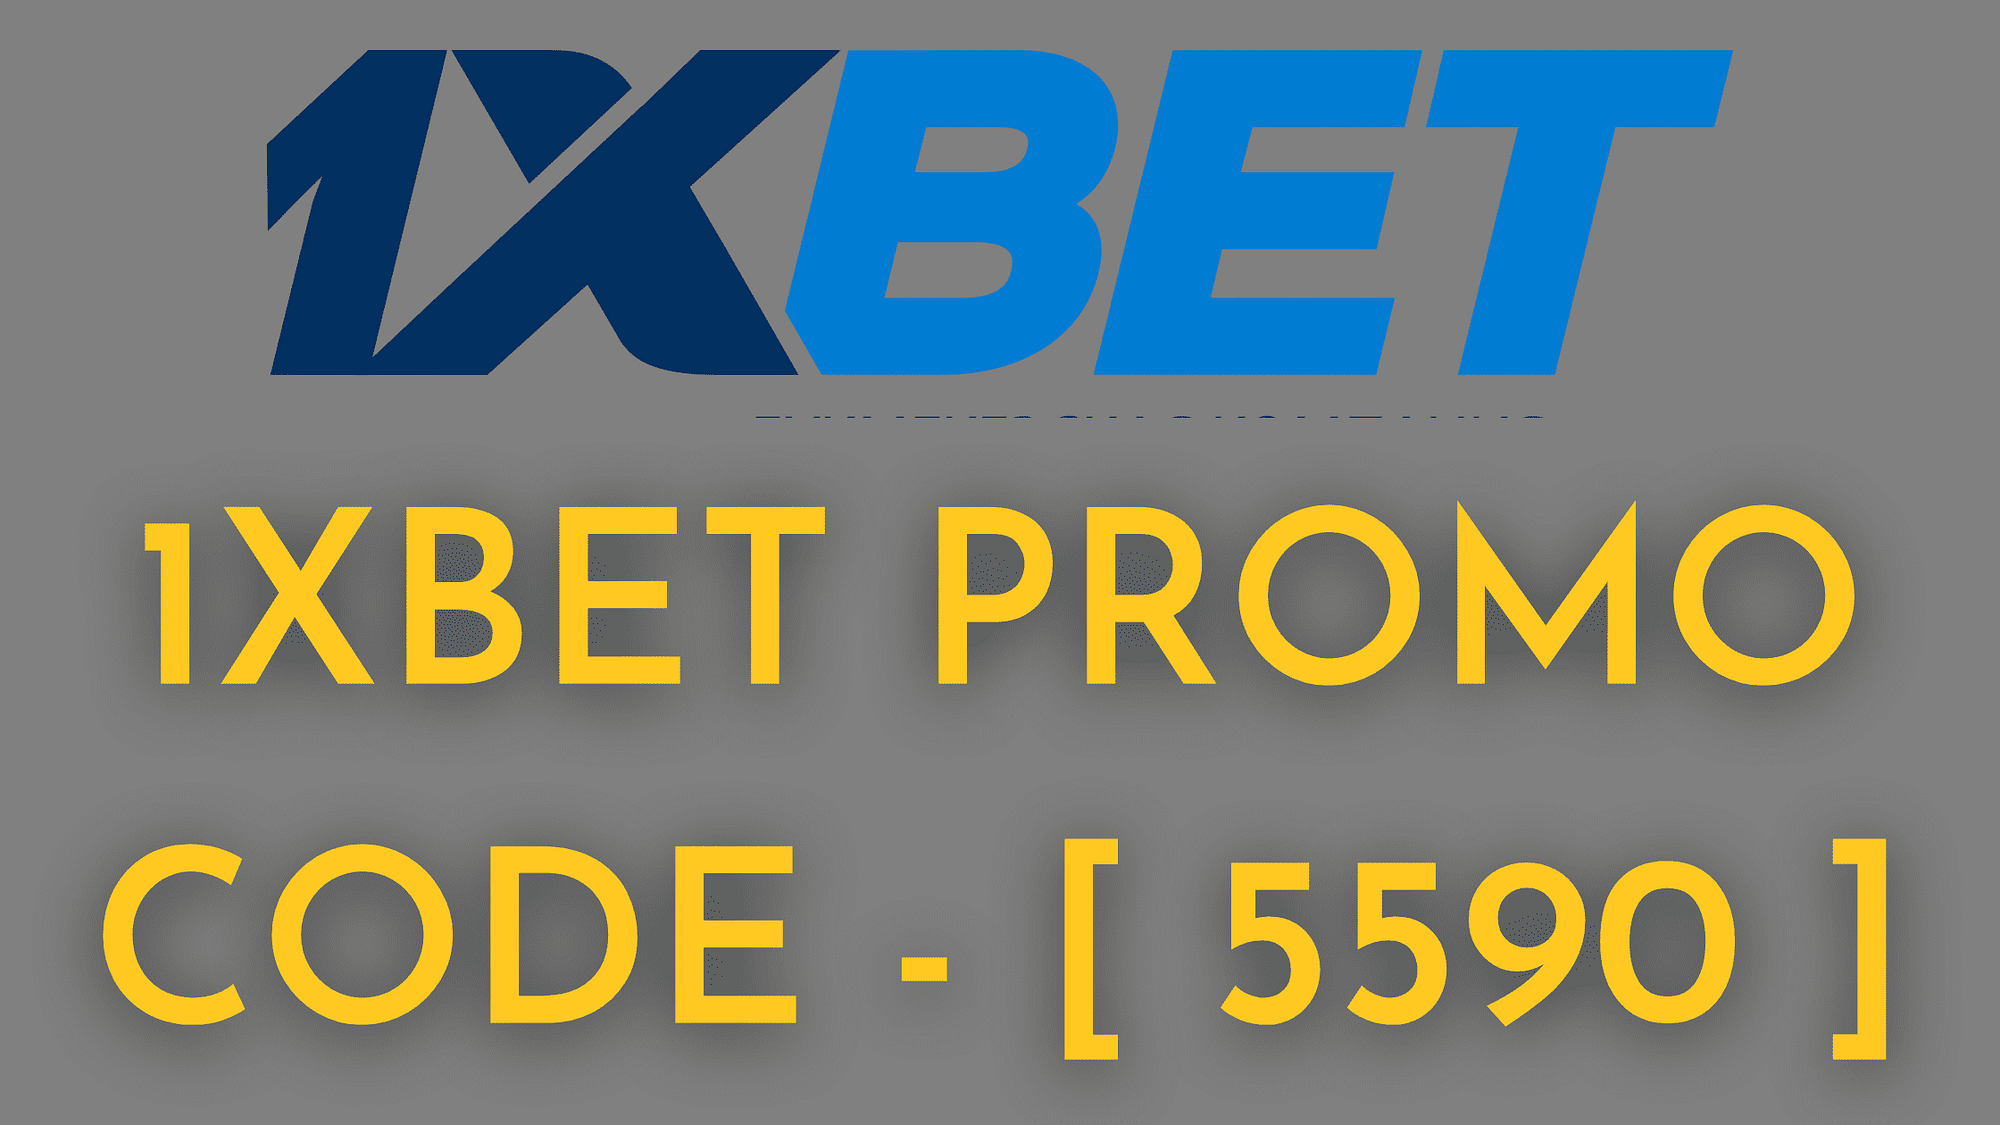 You are currently viewing 1xbet promo code – [ 5590 ] | 1xbet promo codes